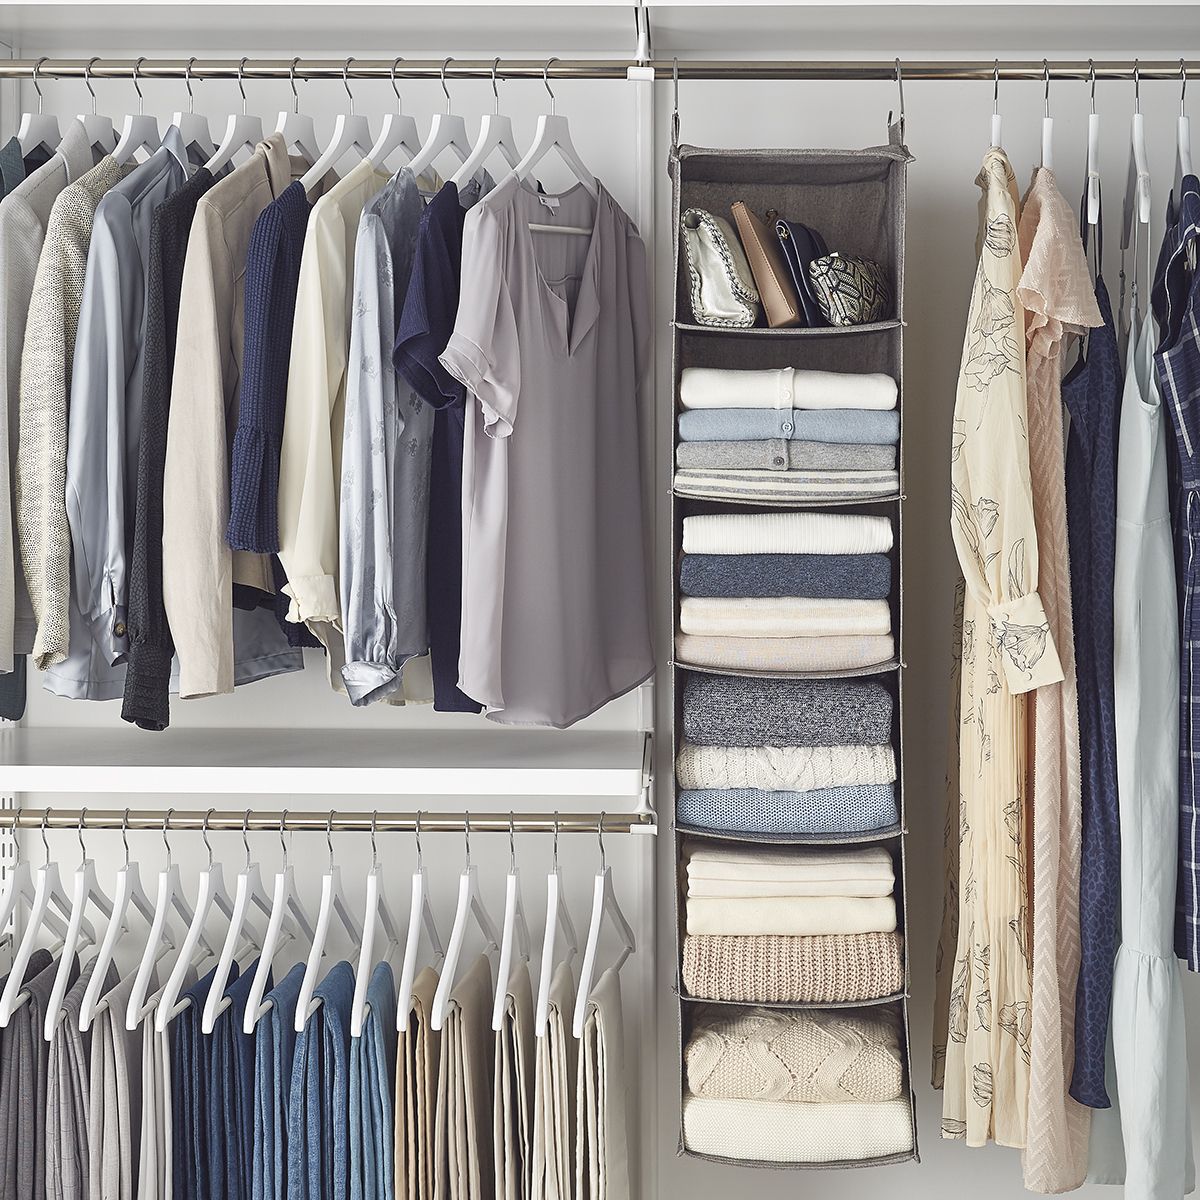 Hanging Wide Closet Organizers | The Container Store Throughout Hanging Closet Organizer Wardrobes (View 3 of 15)